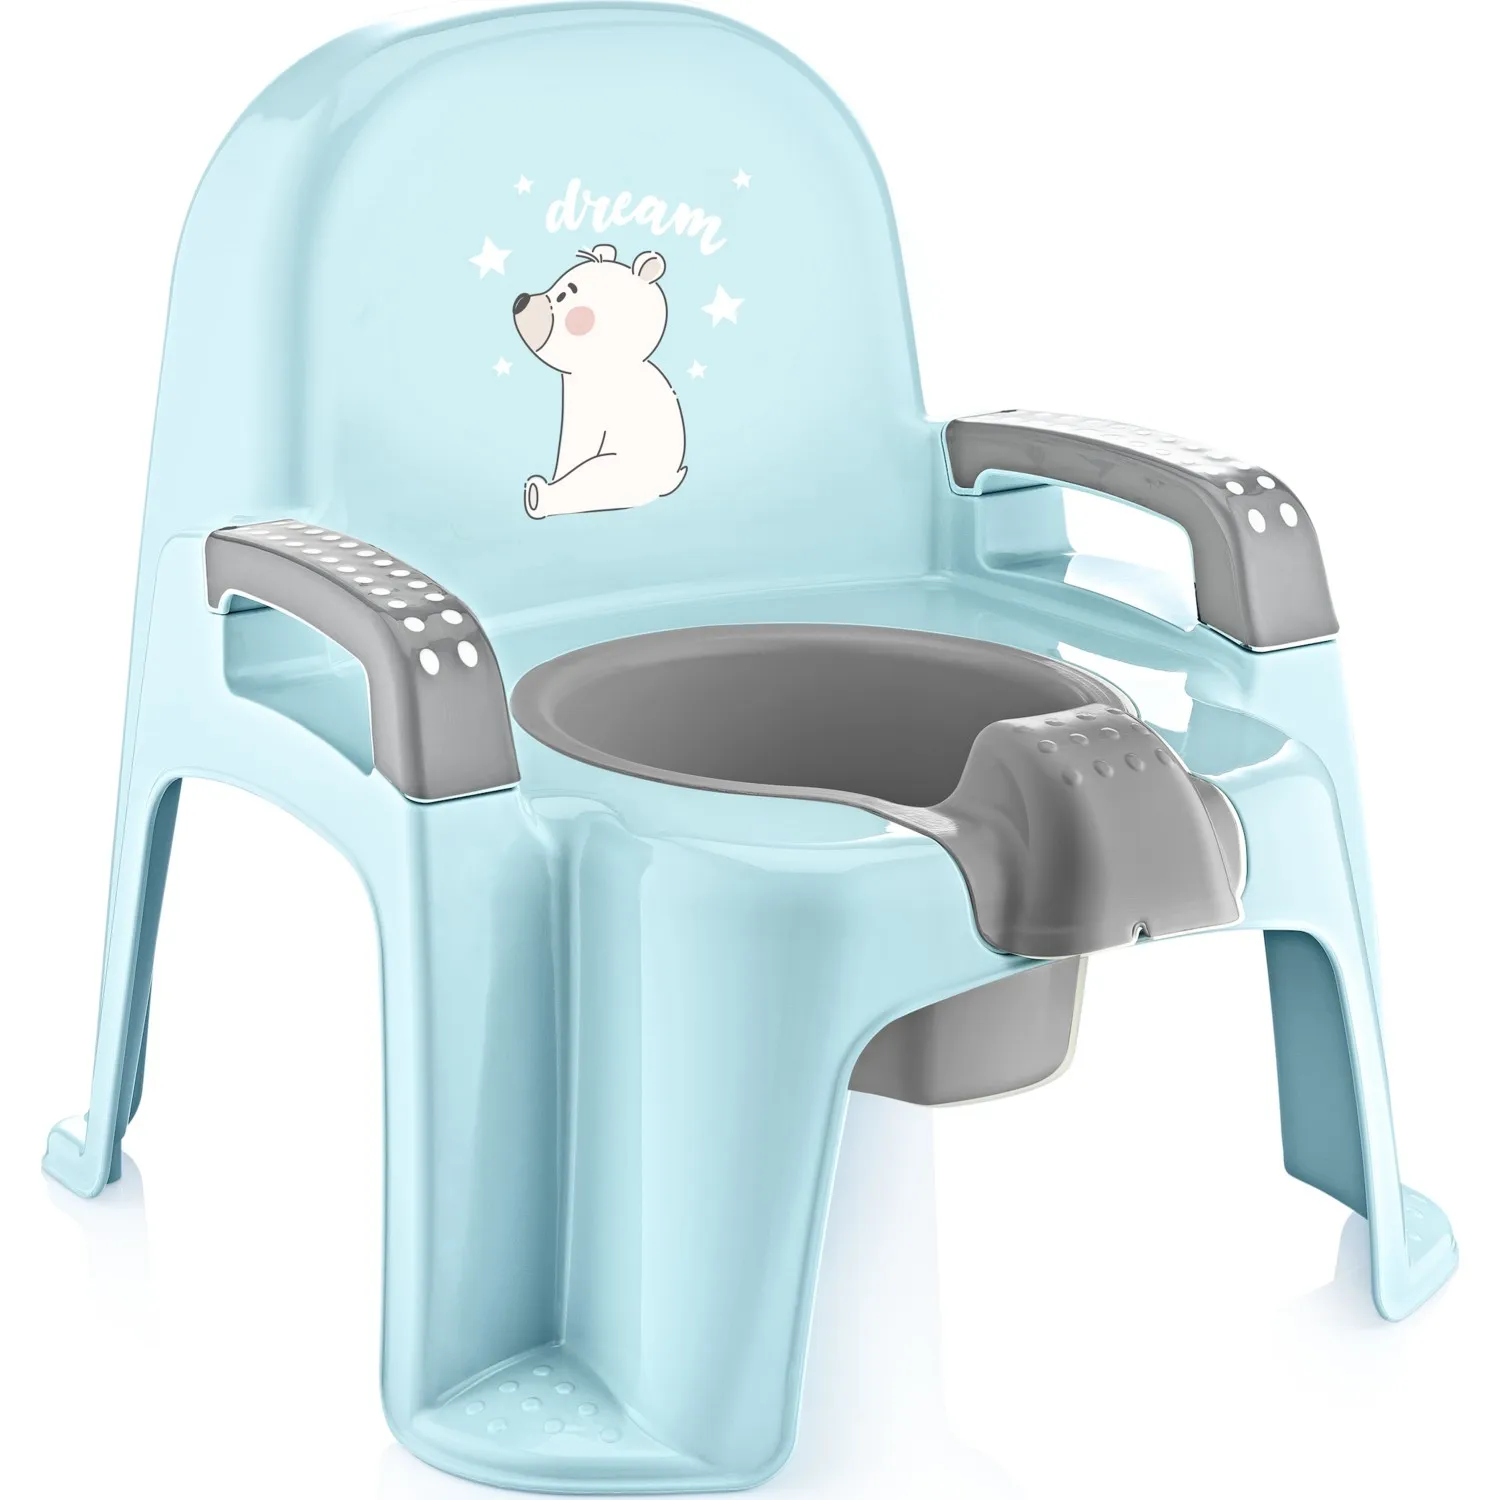 Mischievous Potty Blue Potty Blue-pink-white Baby Potty Potty Training Toilet Training Toys durable plastic with removable inter